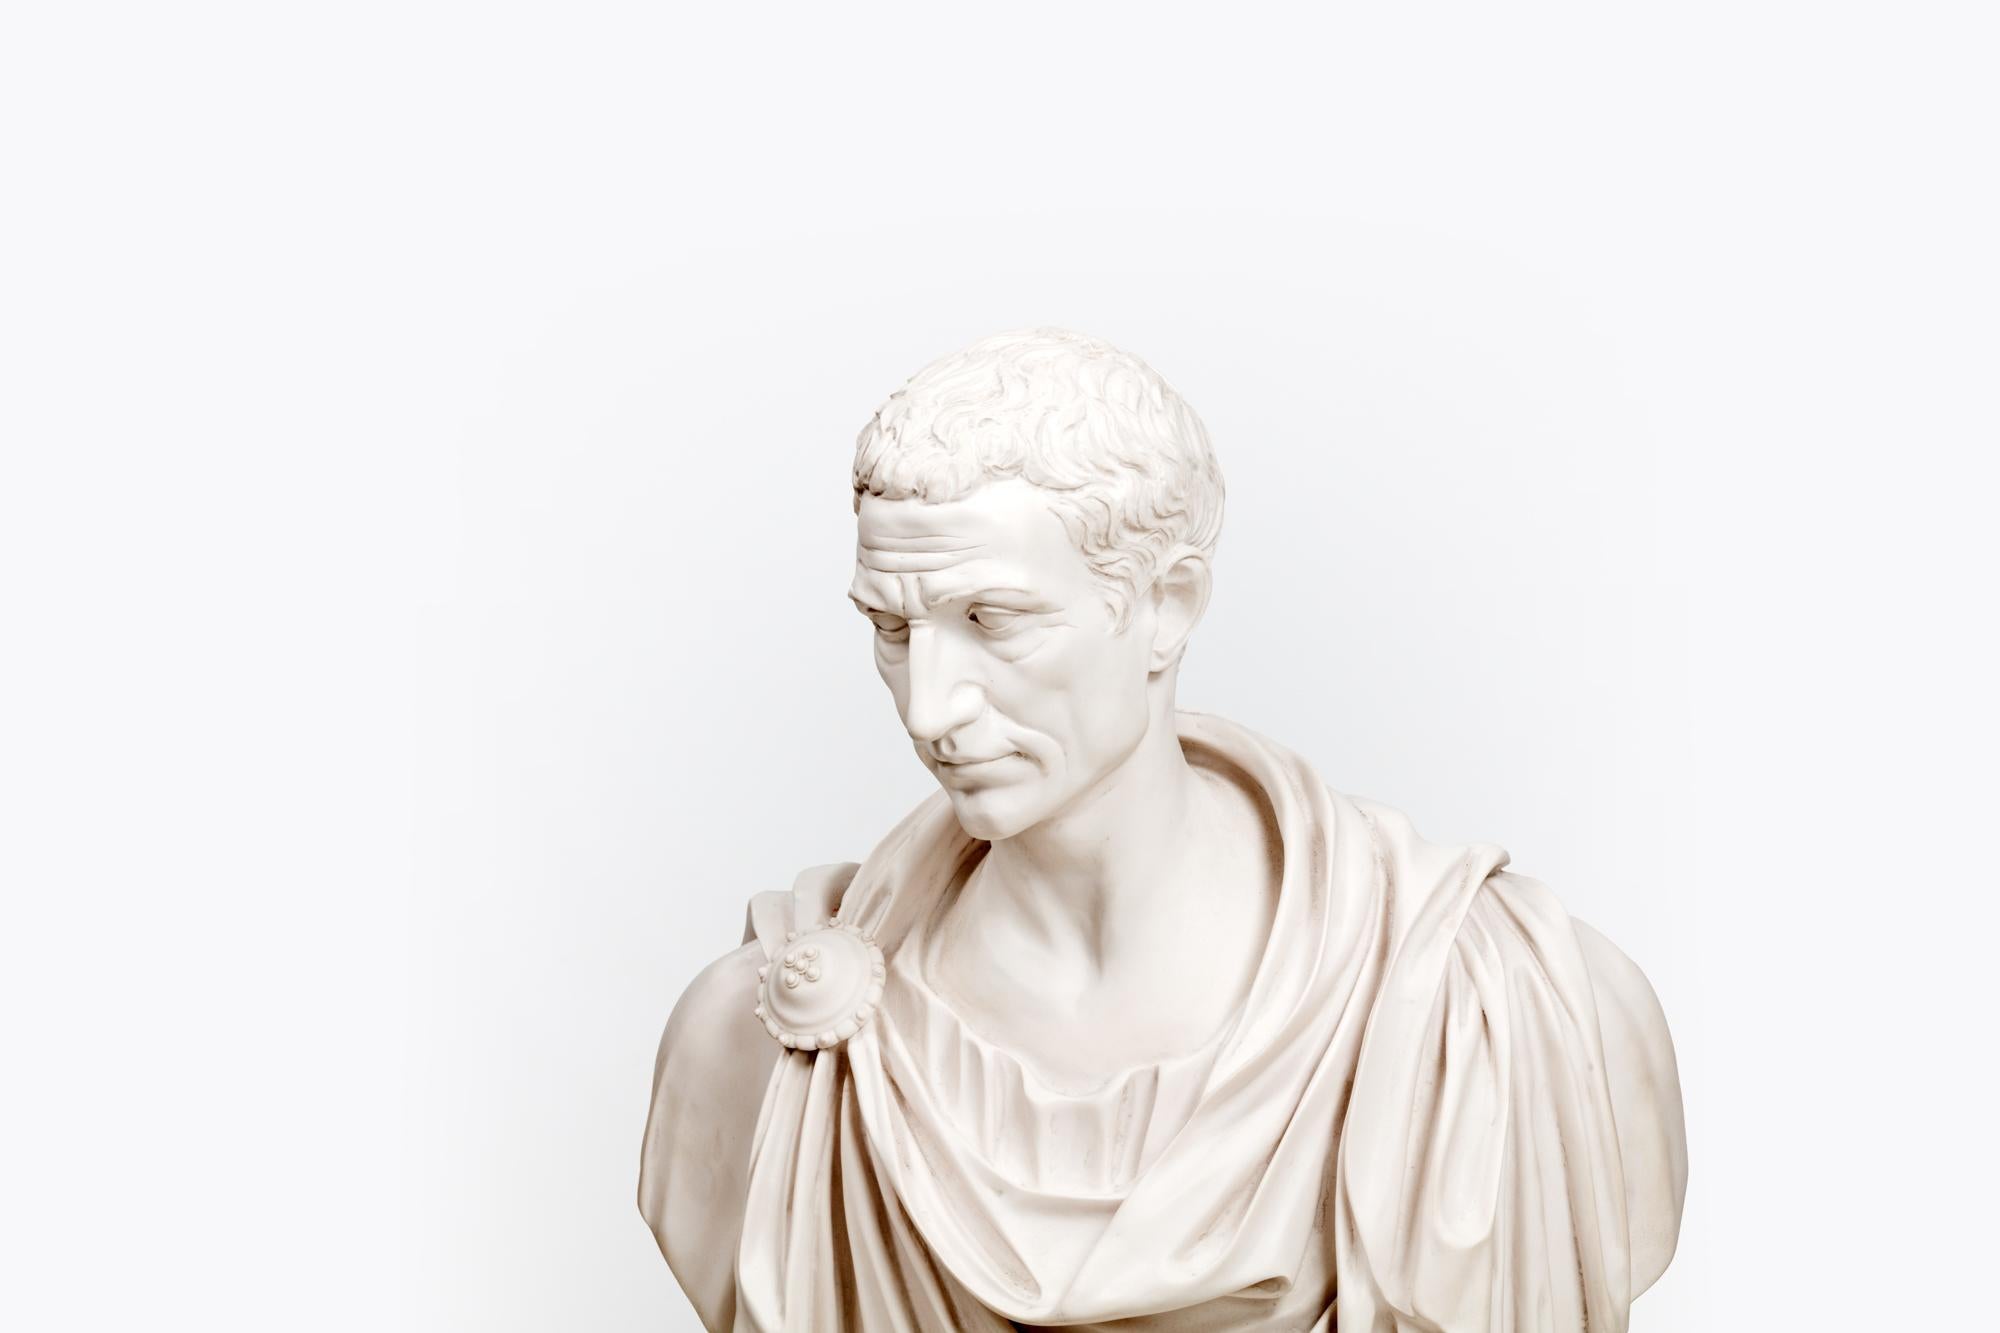 19th Century Parian ware portrait bust of Roman Emperor Julius Caesar in draped toga.

Parian ware is a type of biscuit porcelain which imitates the style of carved marble.

Gaius Julius Caesar was a Roman general and statesman and a distinguished